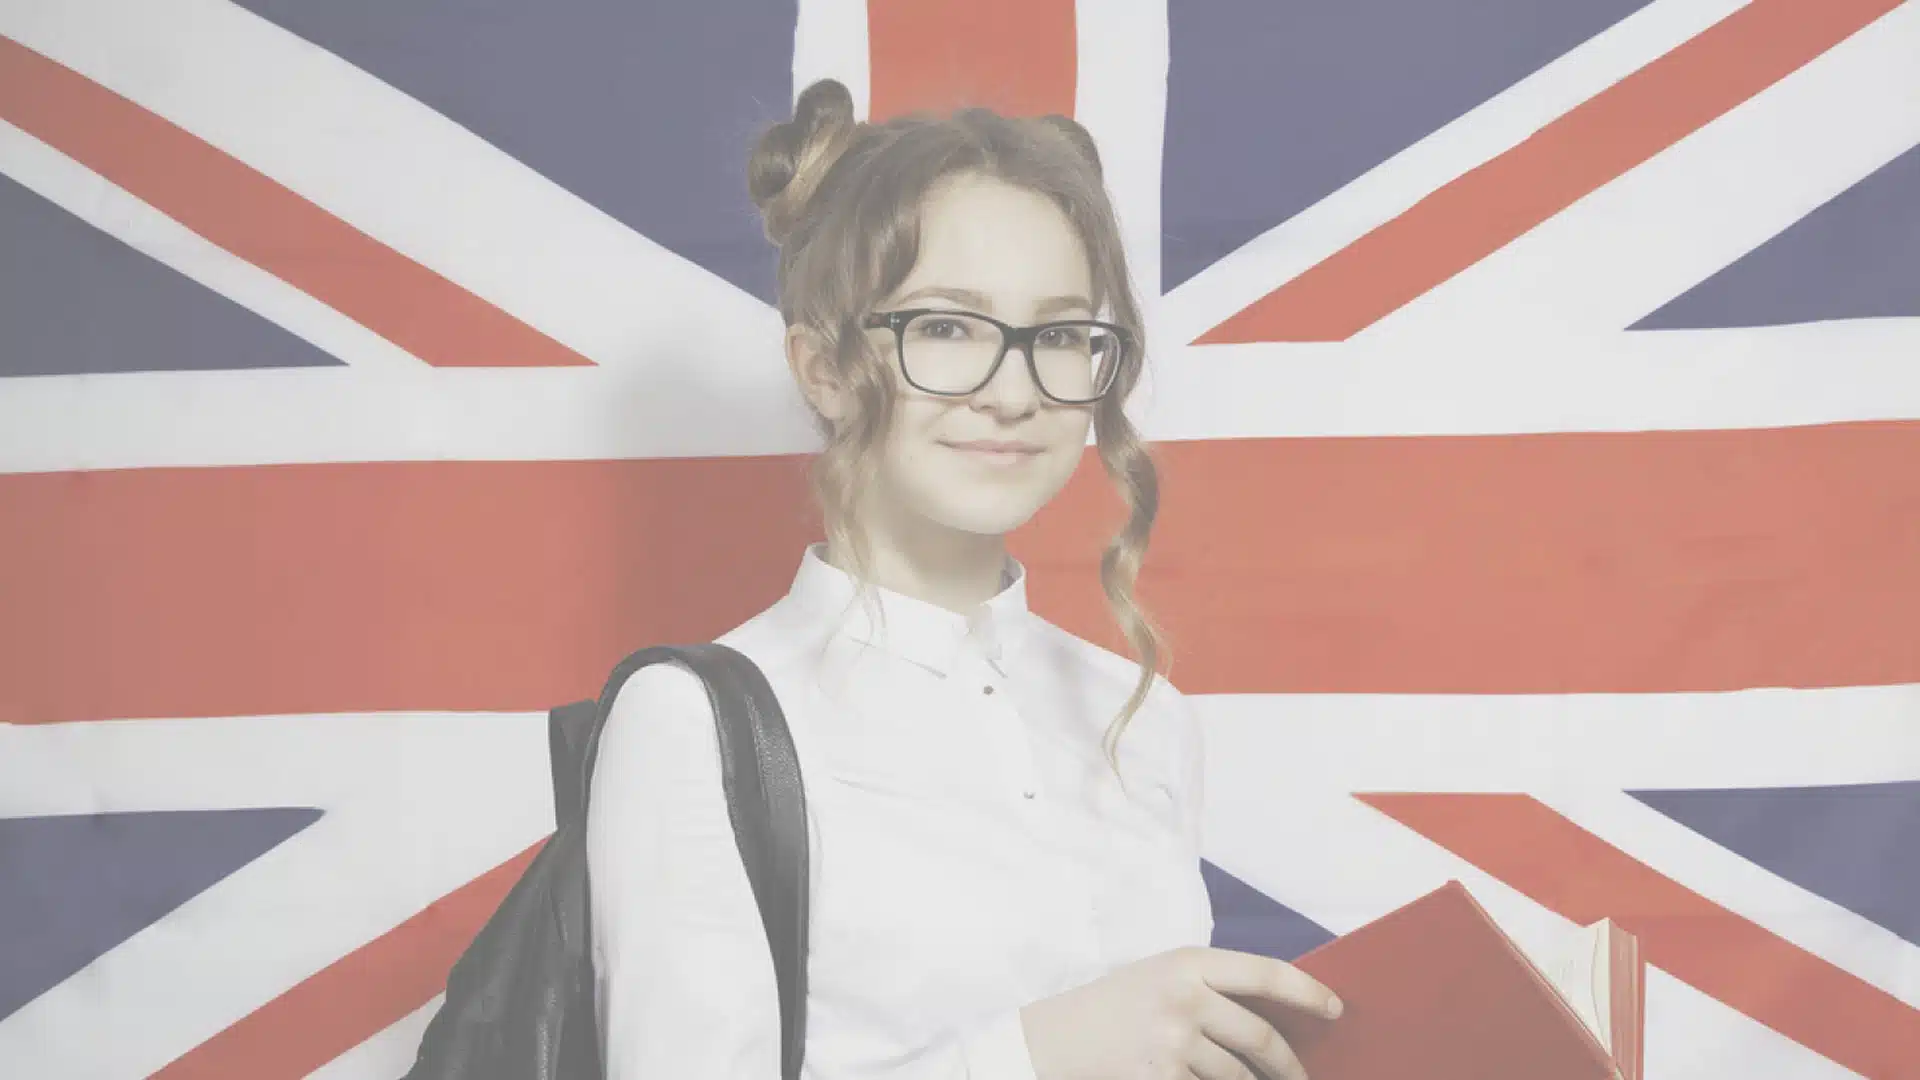 Student Standing Before Union Jack Flag